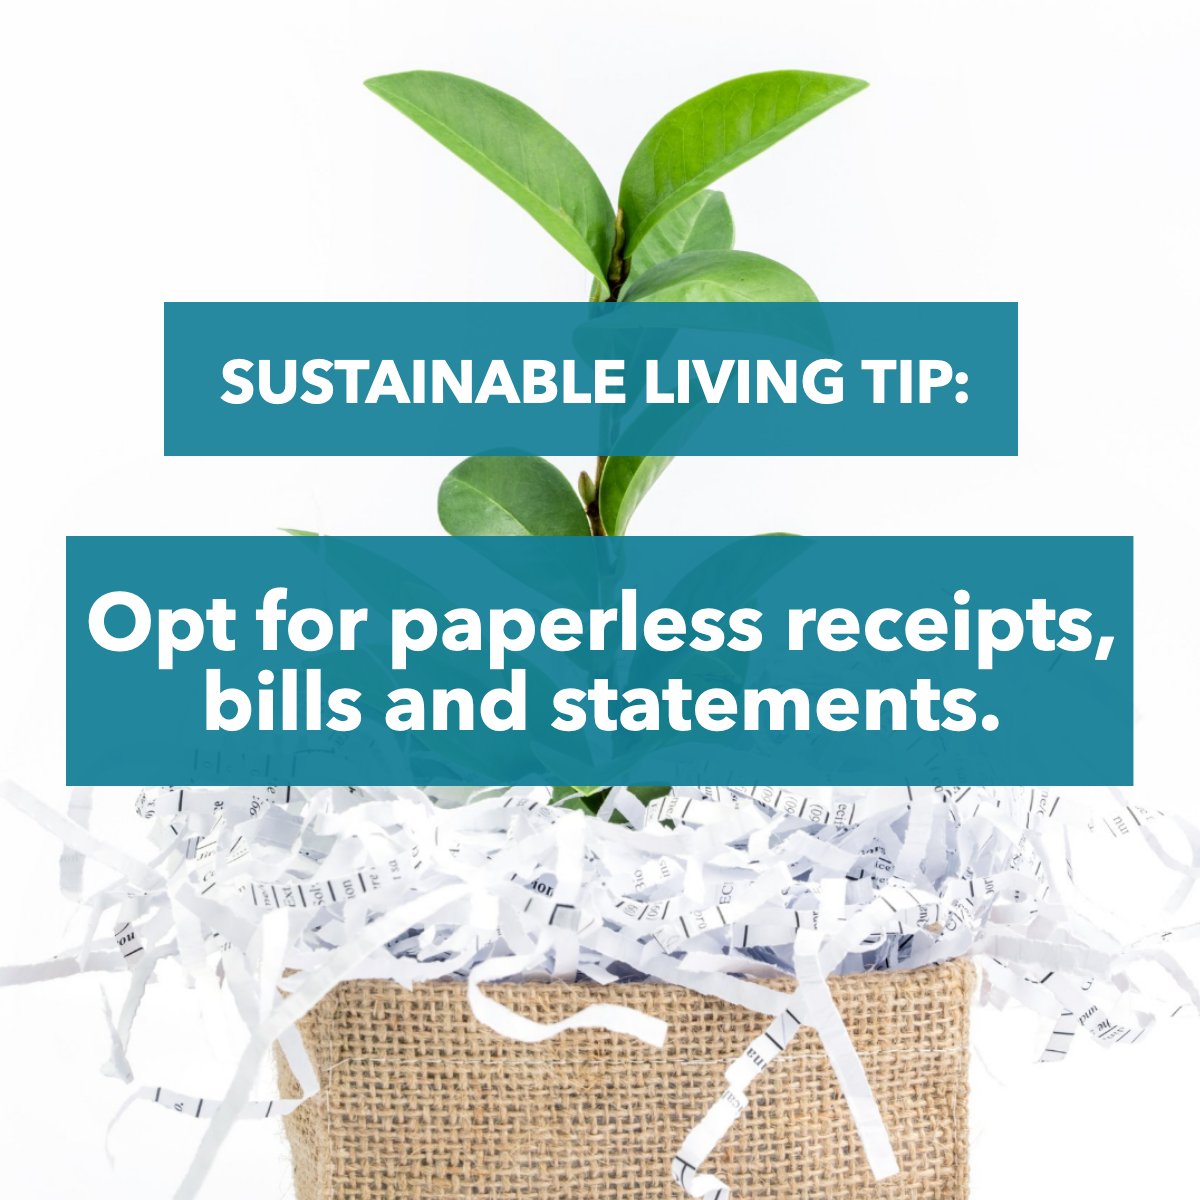 Let's do our part! 

Let's save paper 📄 with this useful tip! 

#green #paperless #sustainableliving #tip